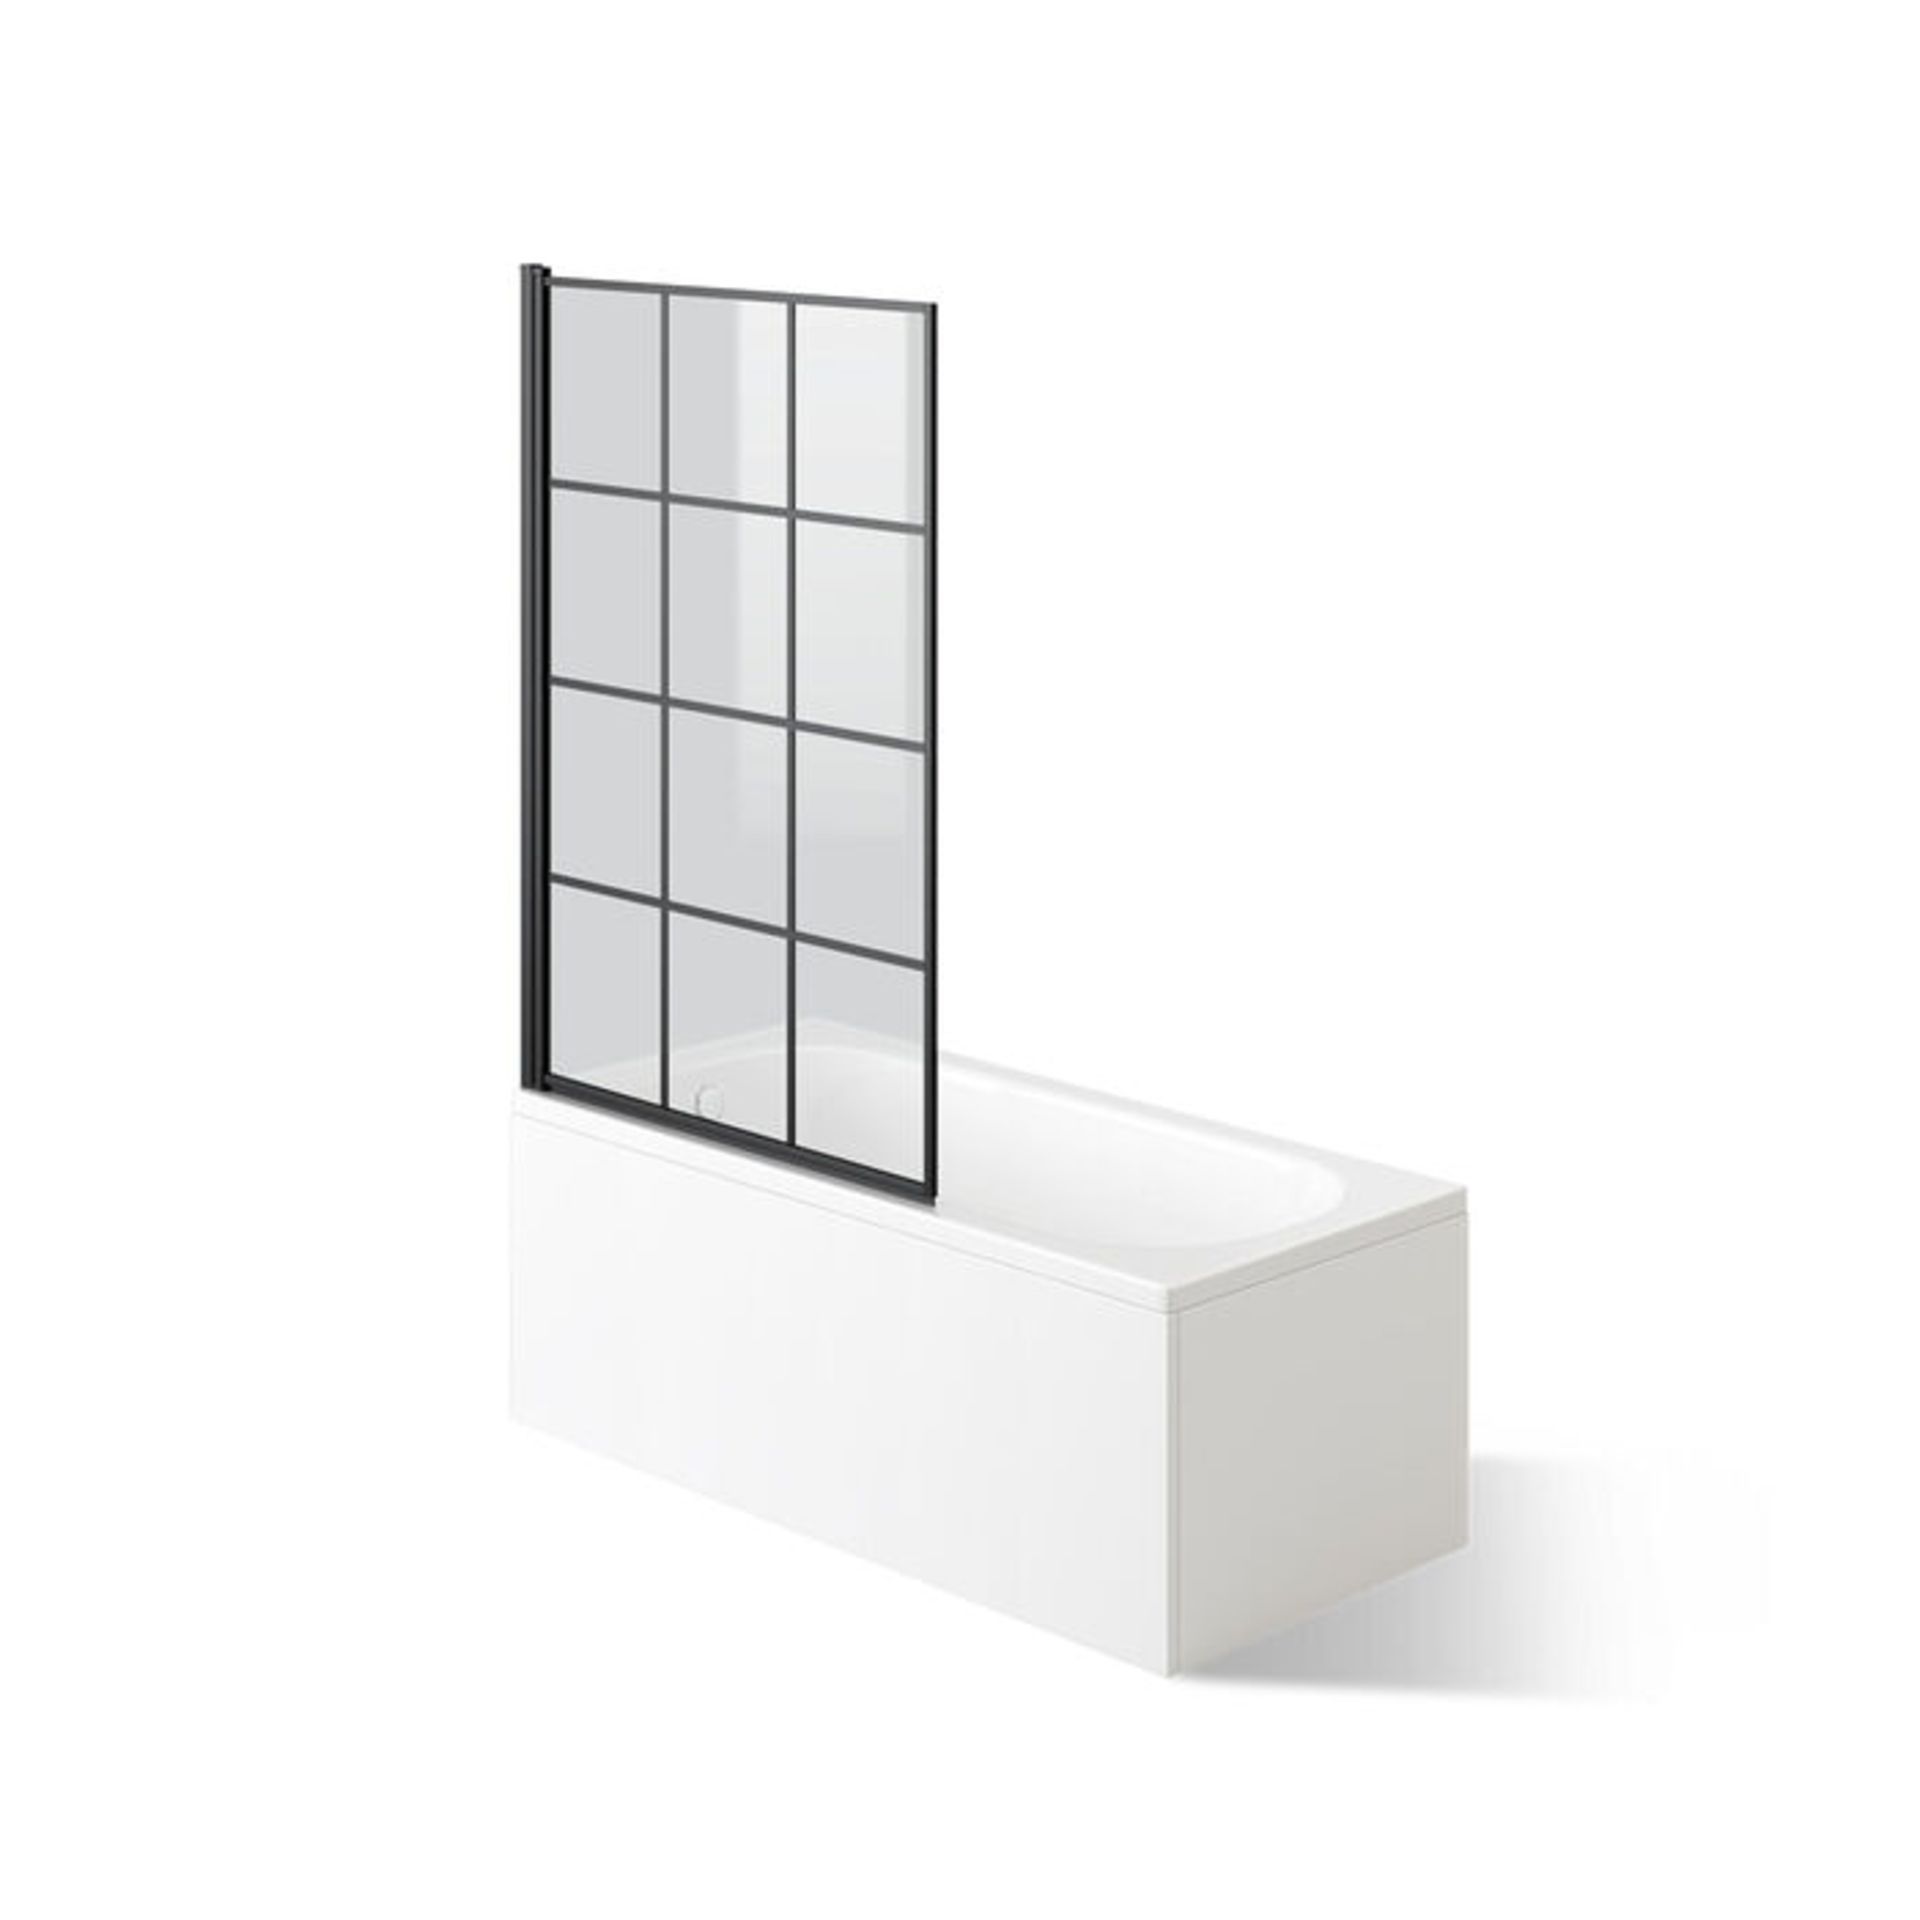 (CP13) 1000mm Shoji Crittall Style Black Bath Screen. RRP £399.99. 6mm EasyClean glass - Our ... - Image 4 of 4